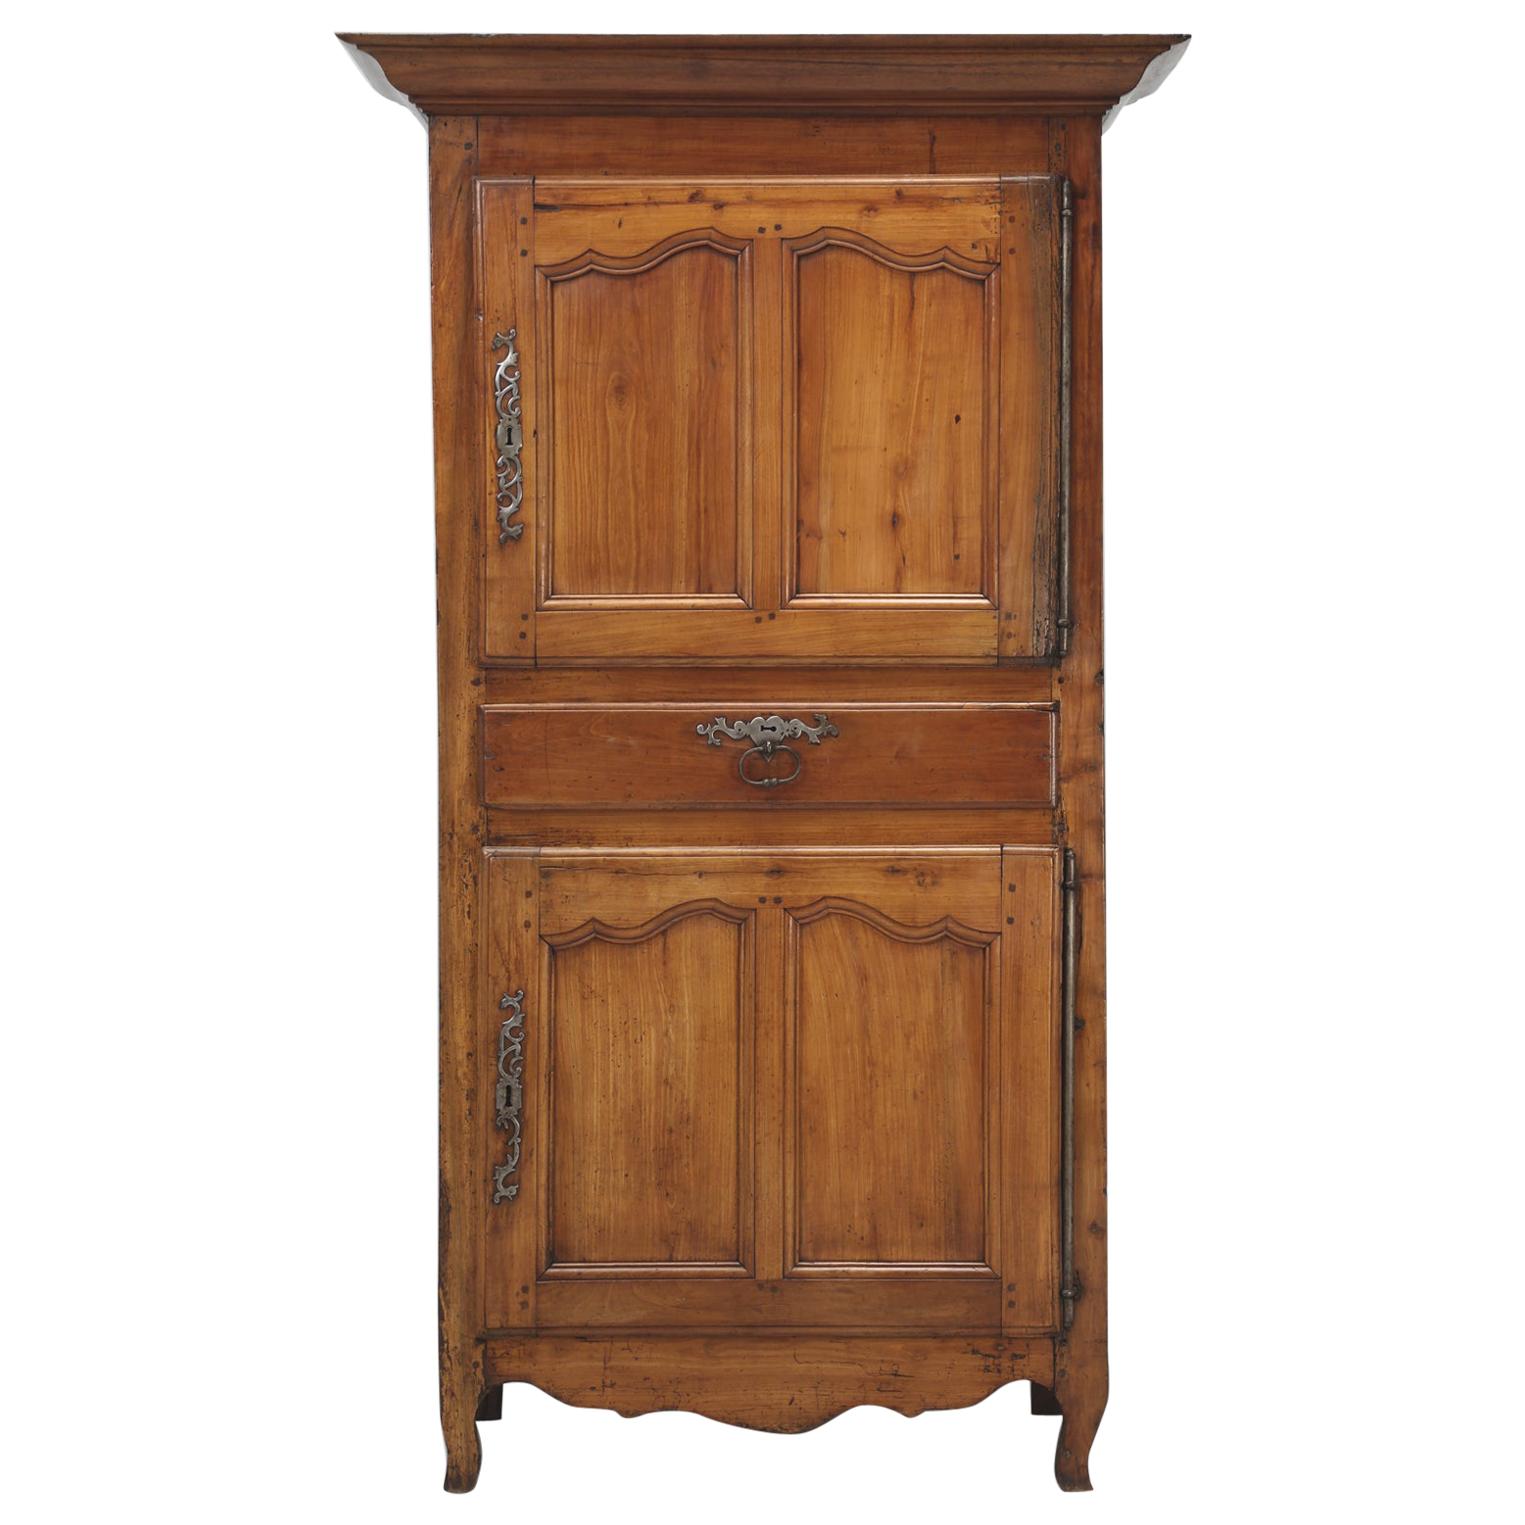 Antique French Cherrywood Bonnetiere 'Small Cupboard', circa 1700s